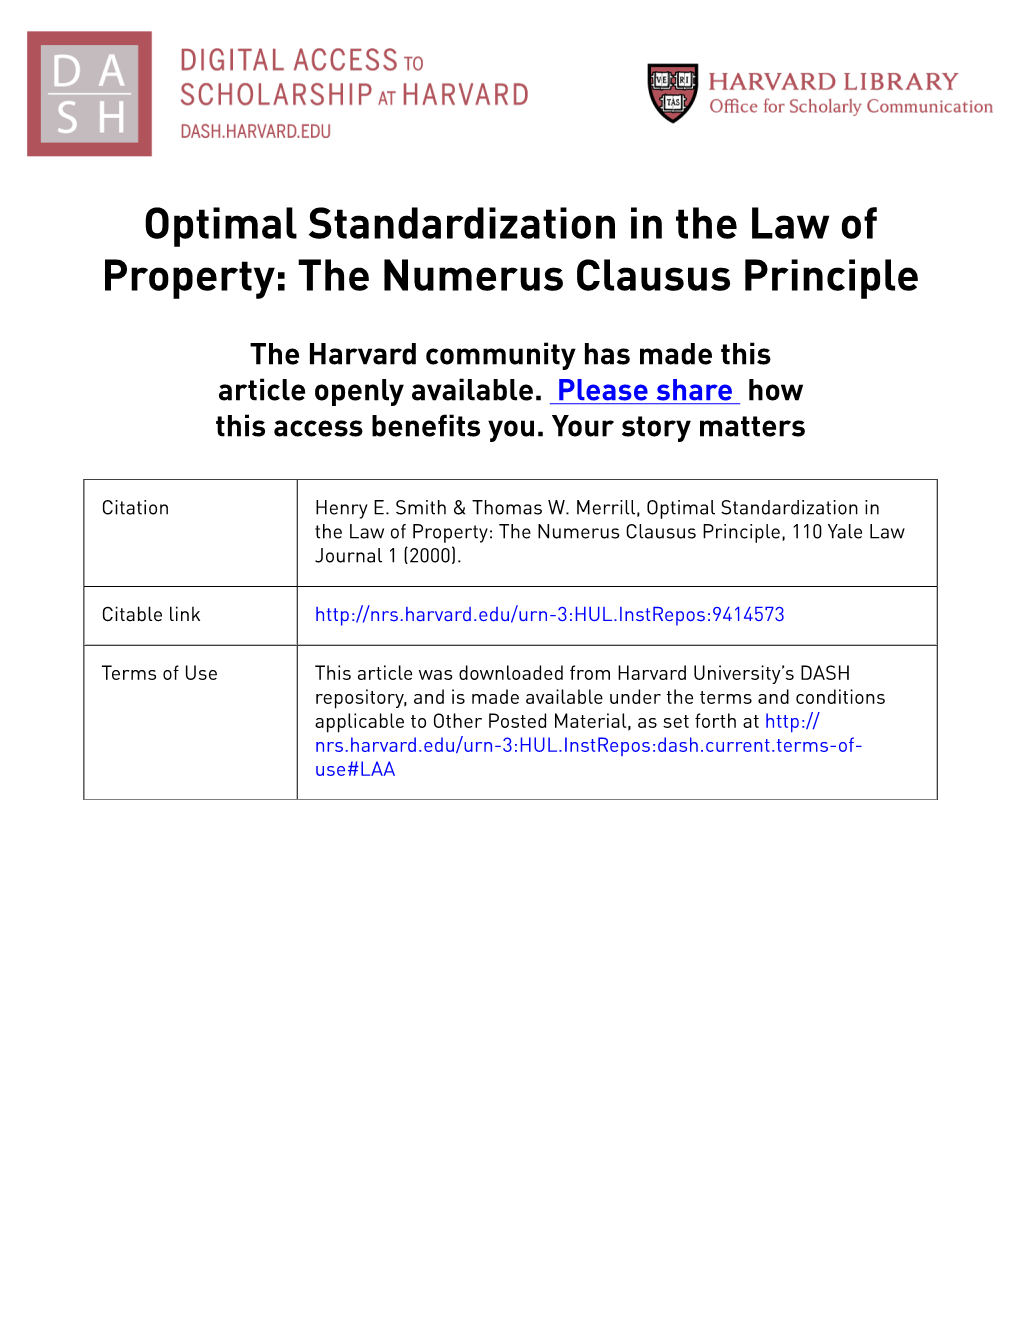 Optimal Standardization in the Law of Numerus Clausus Principle